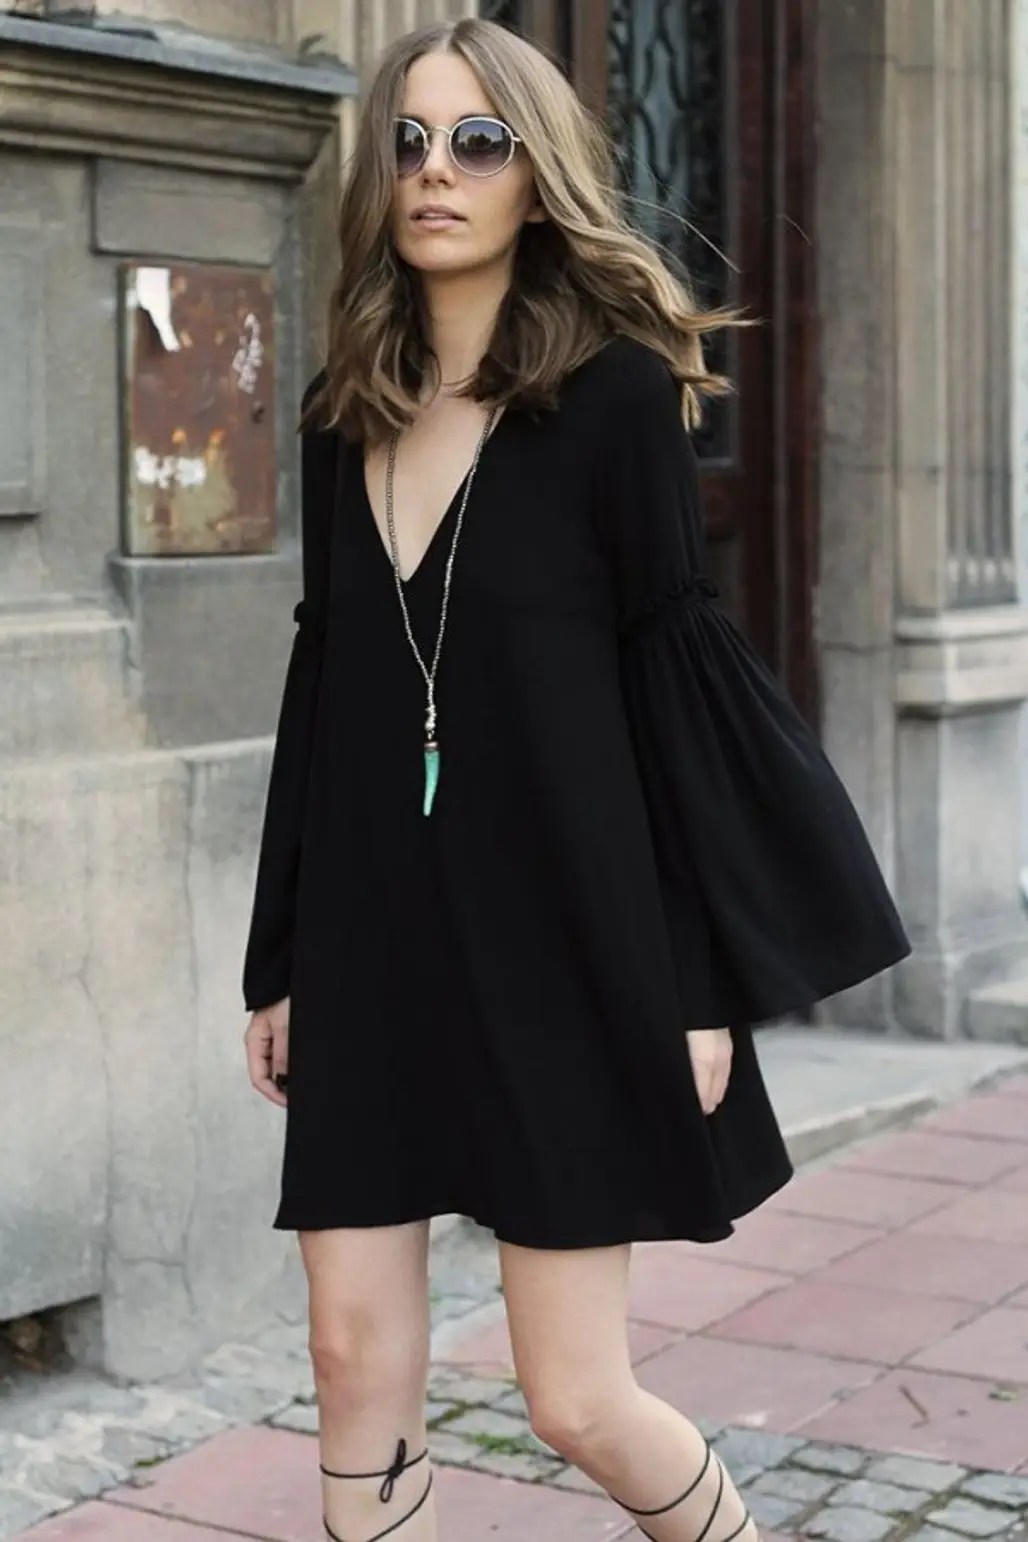 This LBD with a Twist